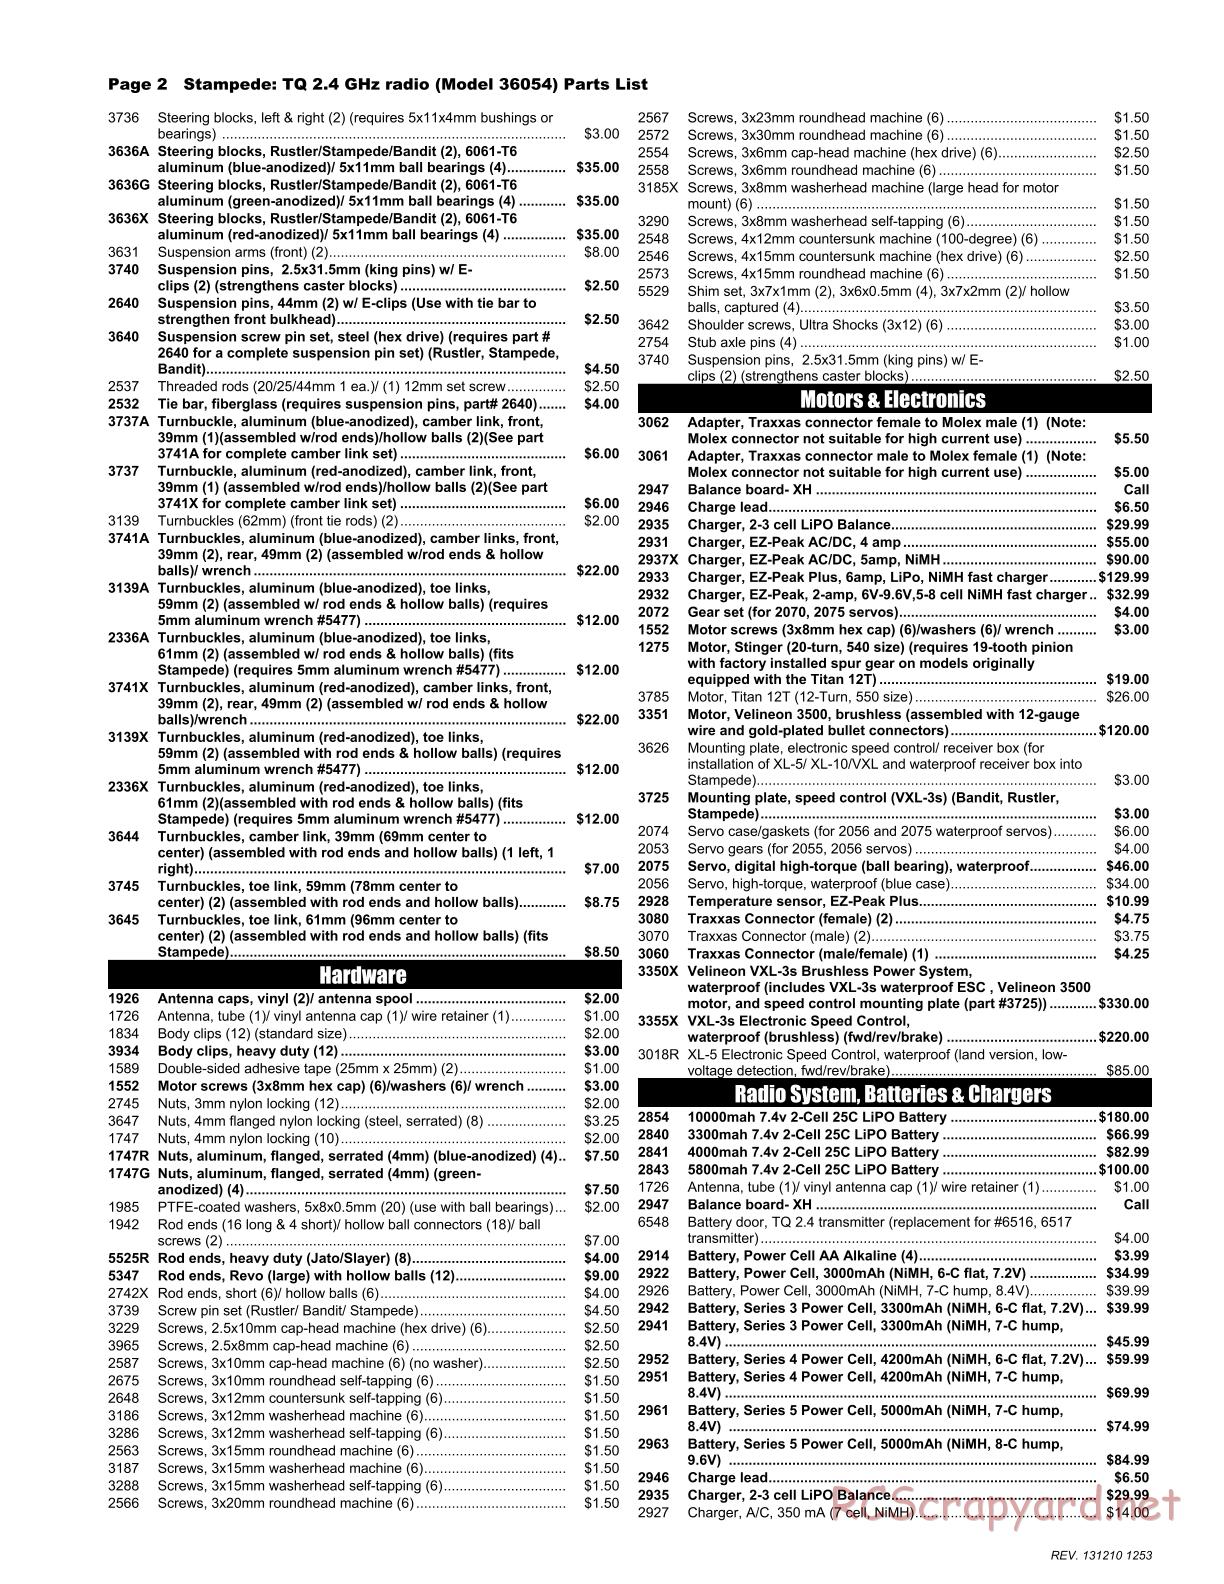 Traxxas - Stampede XL-5 - Parts List - Page 2